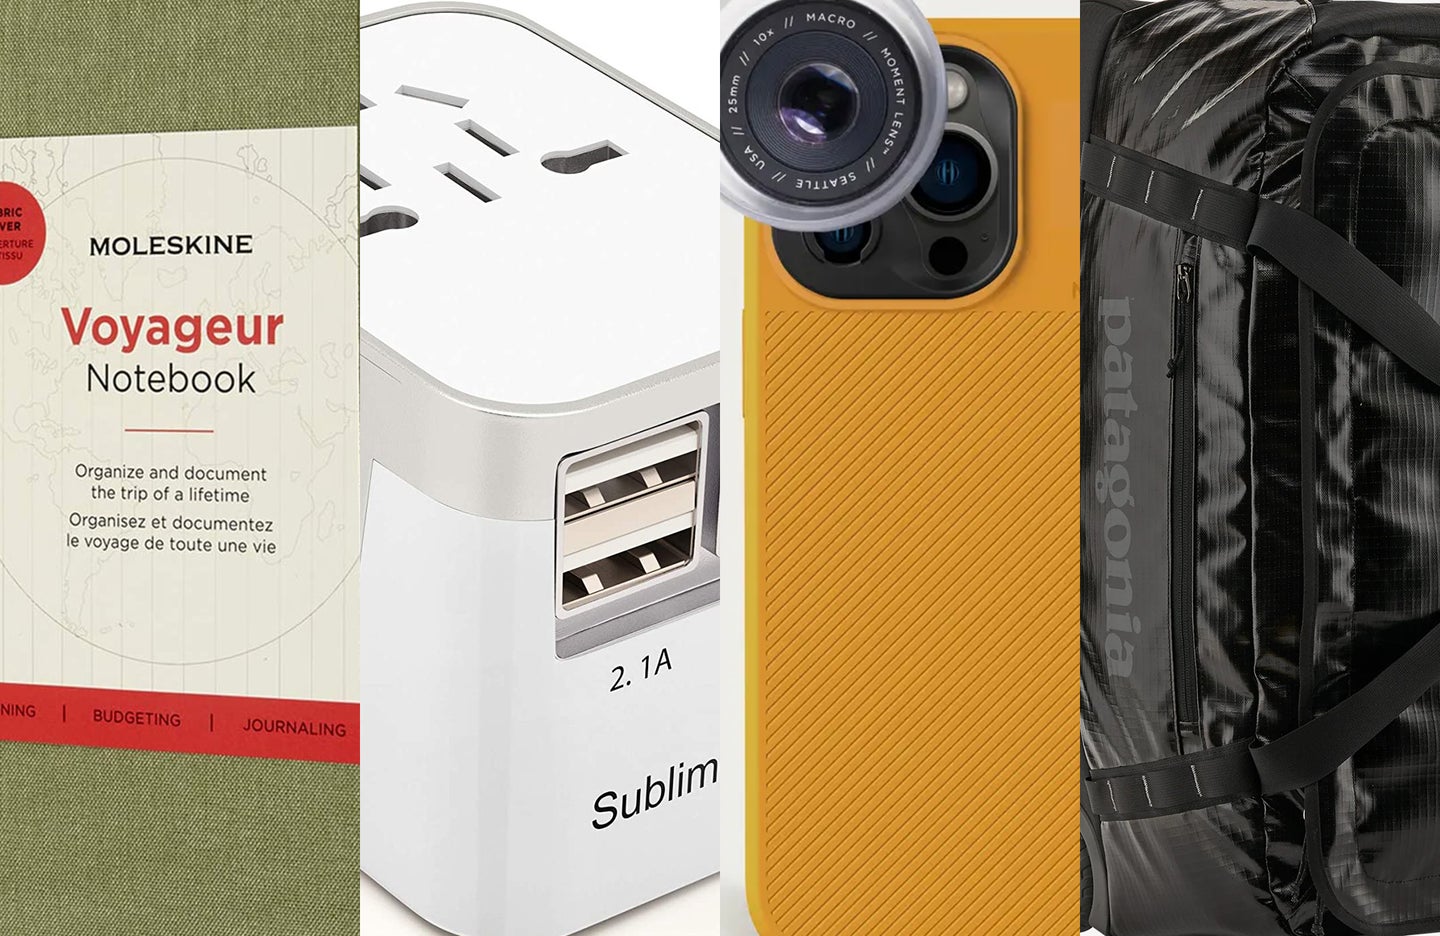 Best travel gifts for photographers